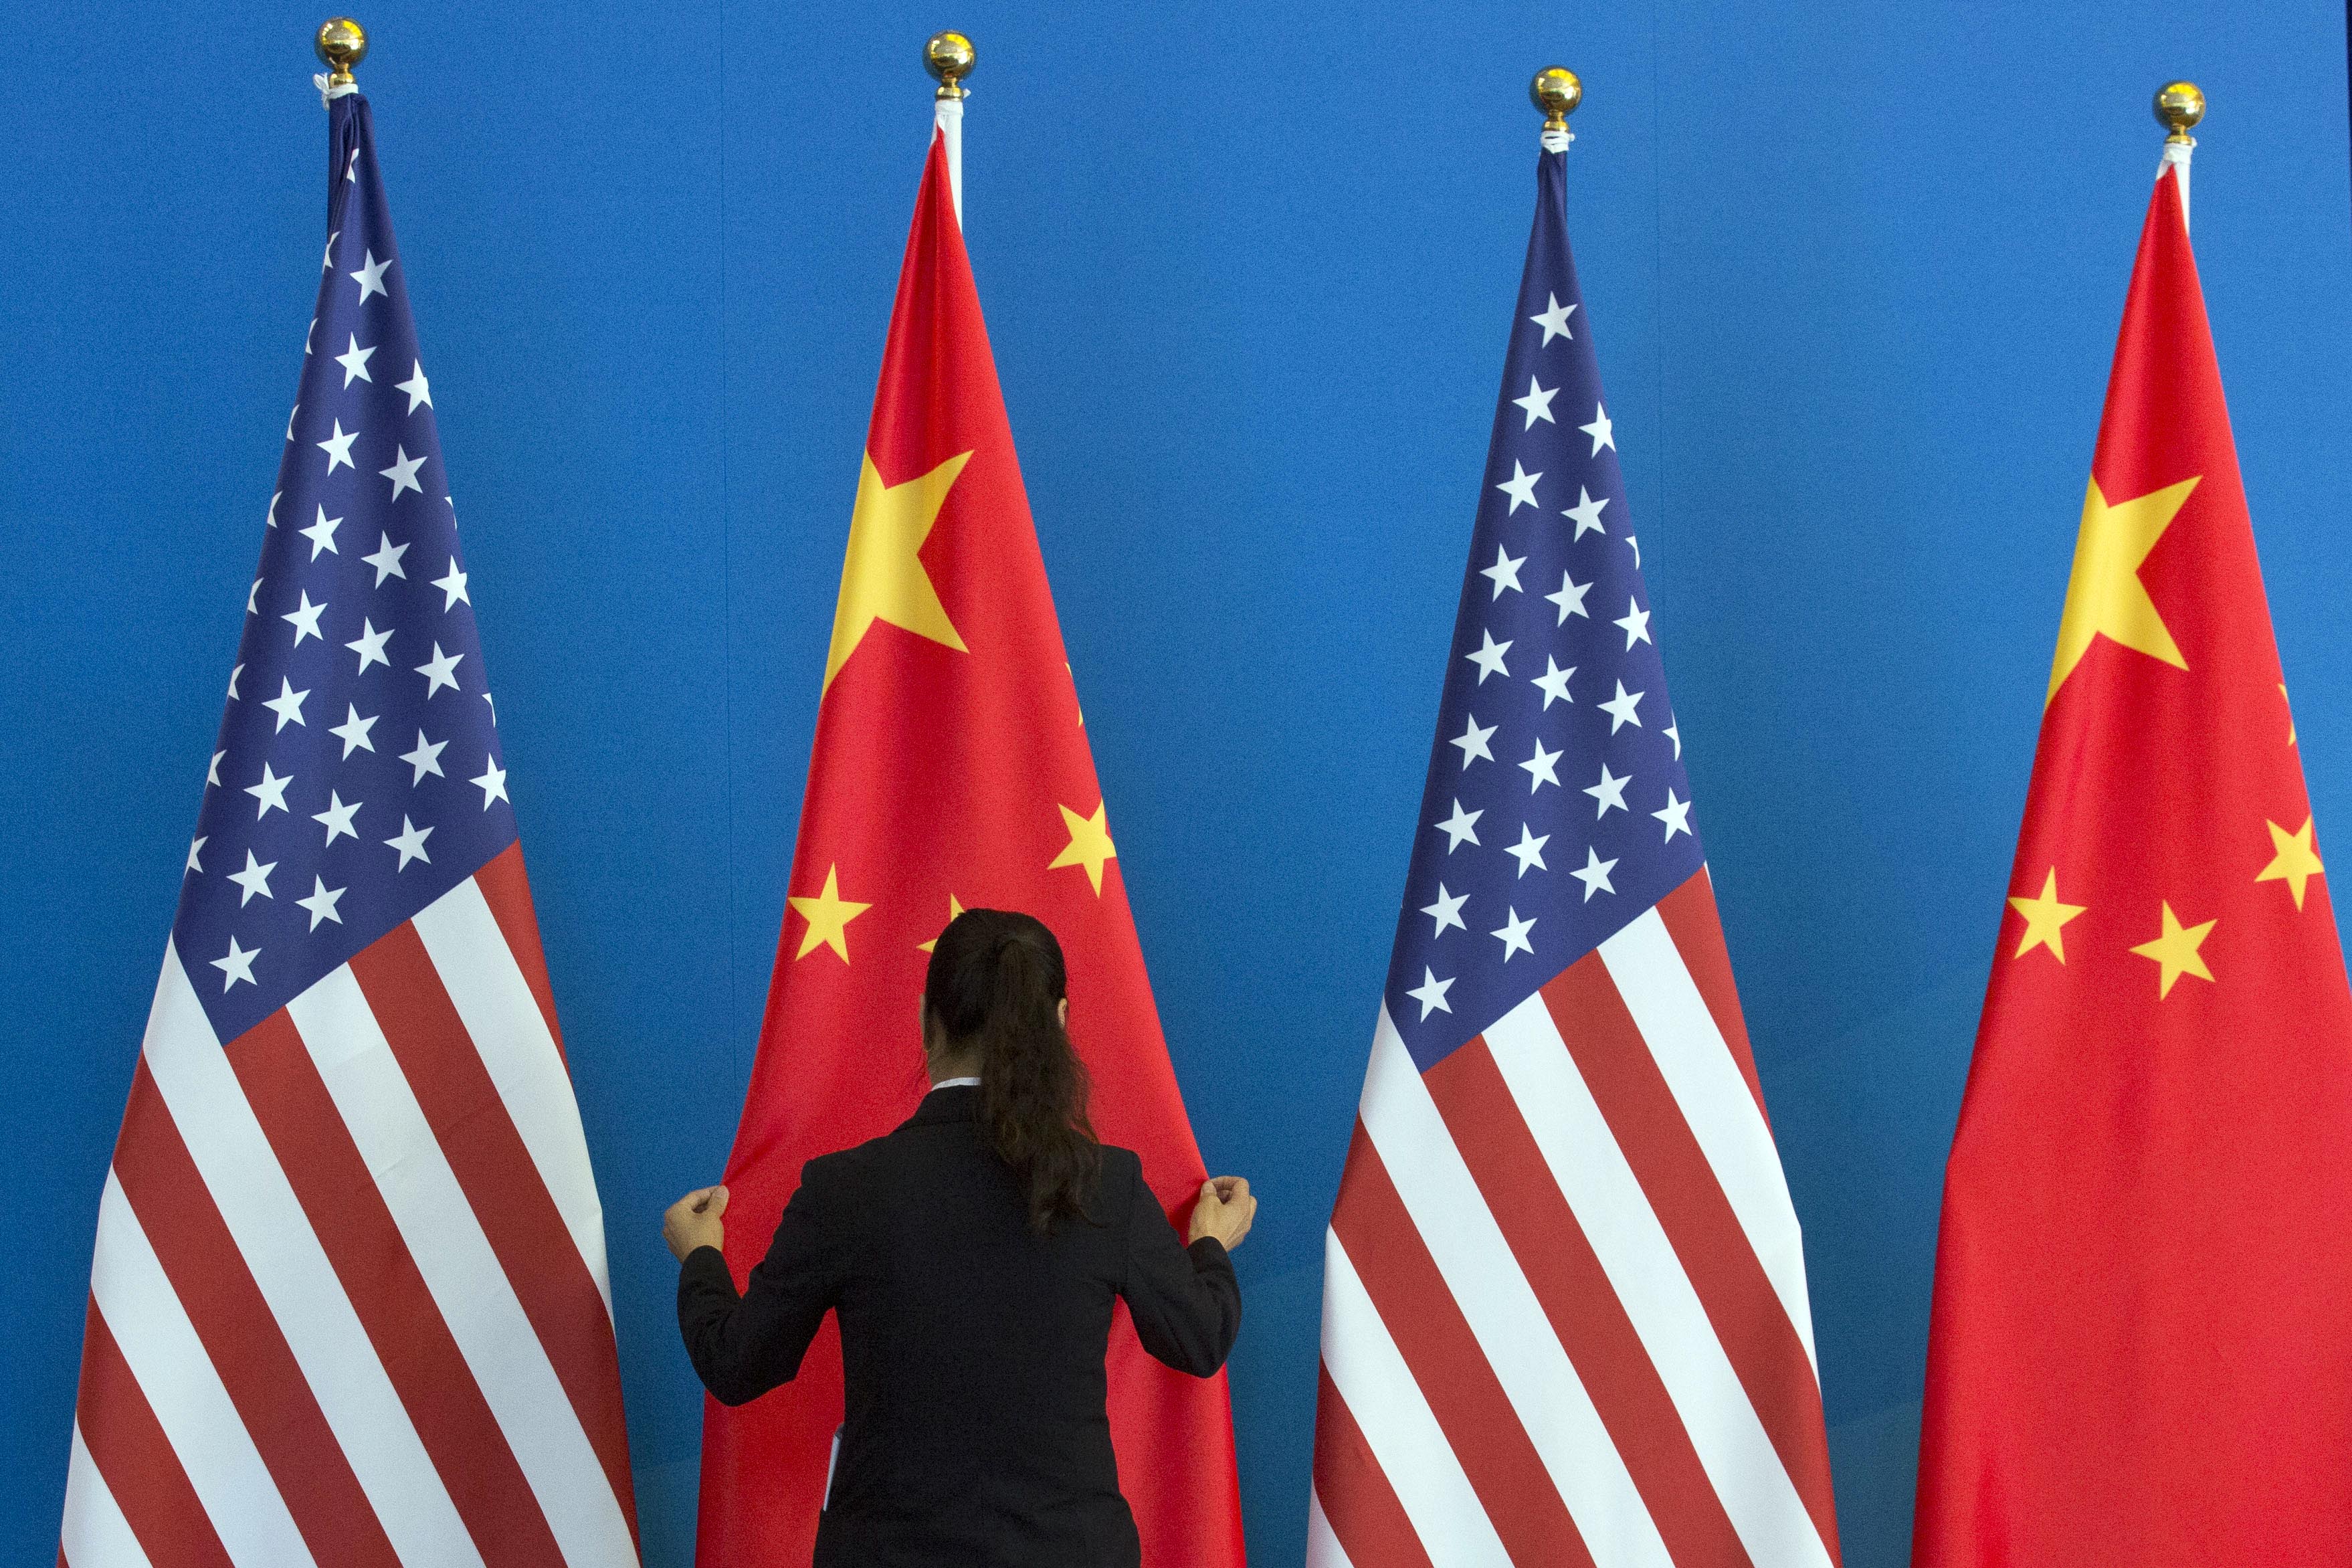 A team within the US State Department is providing advice to other nations on how to prepare for or mitigate economic pressure from China.